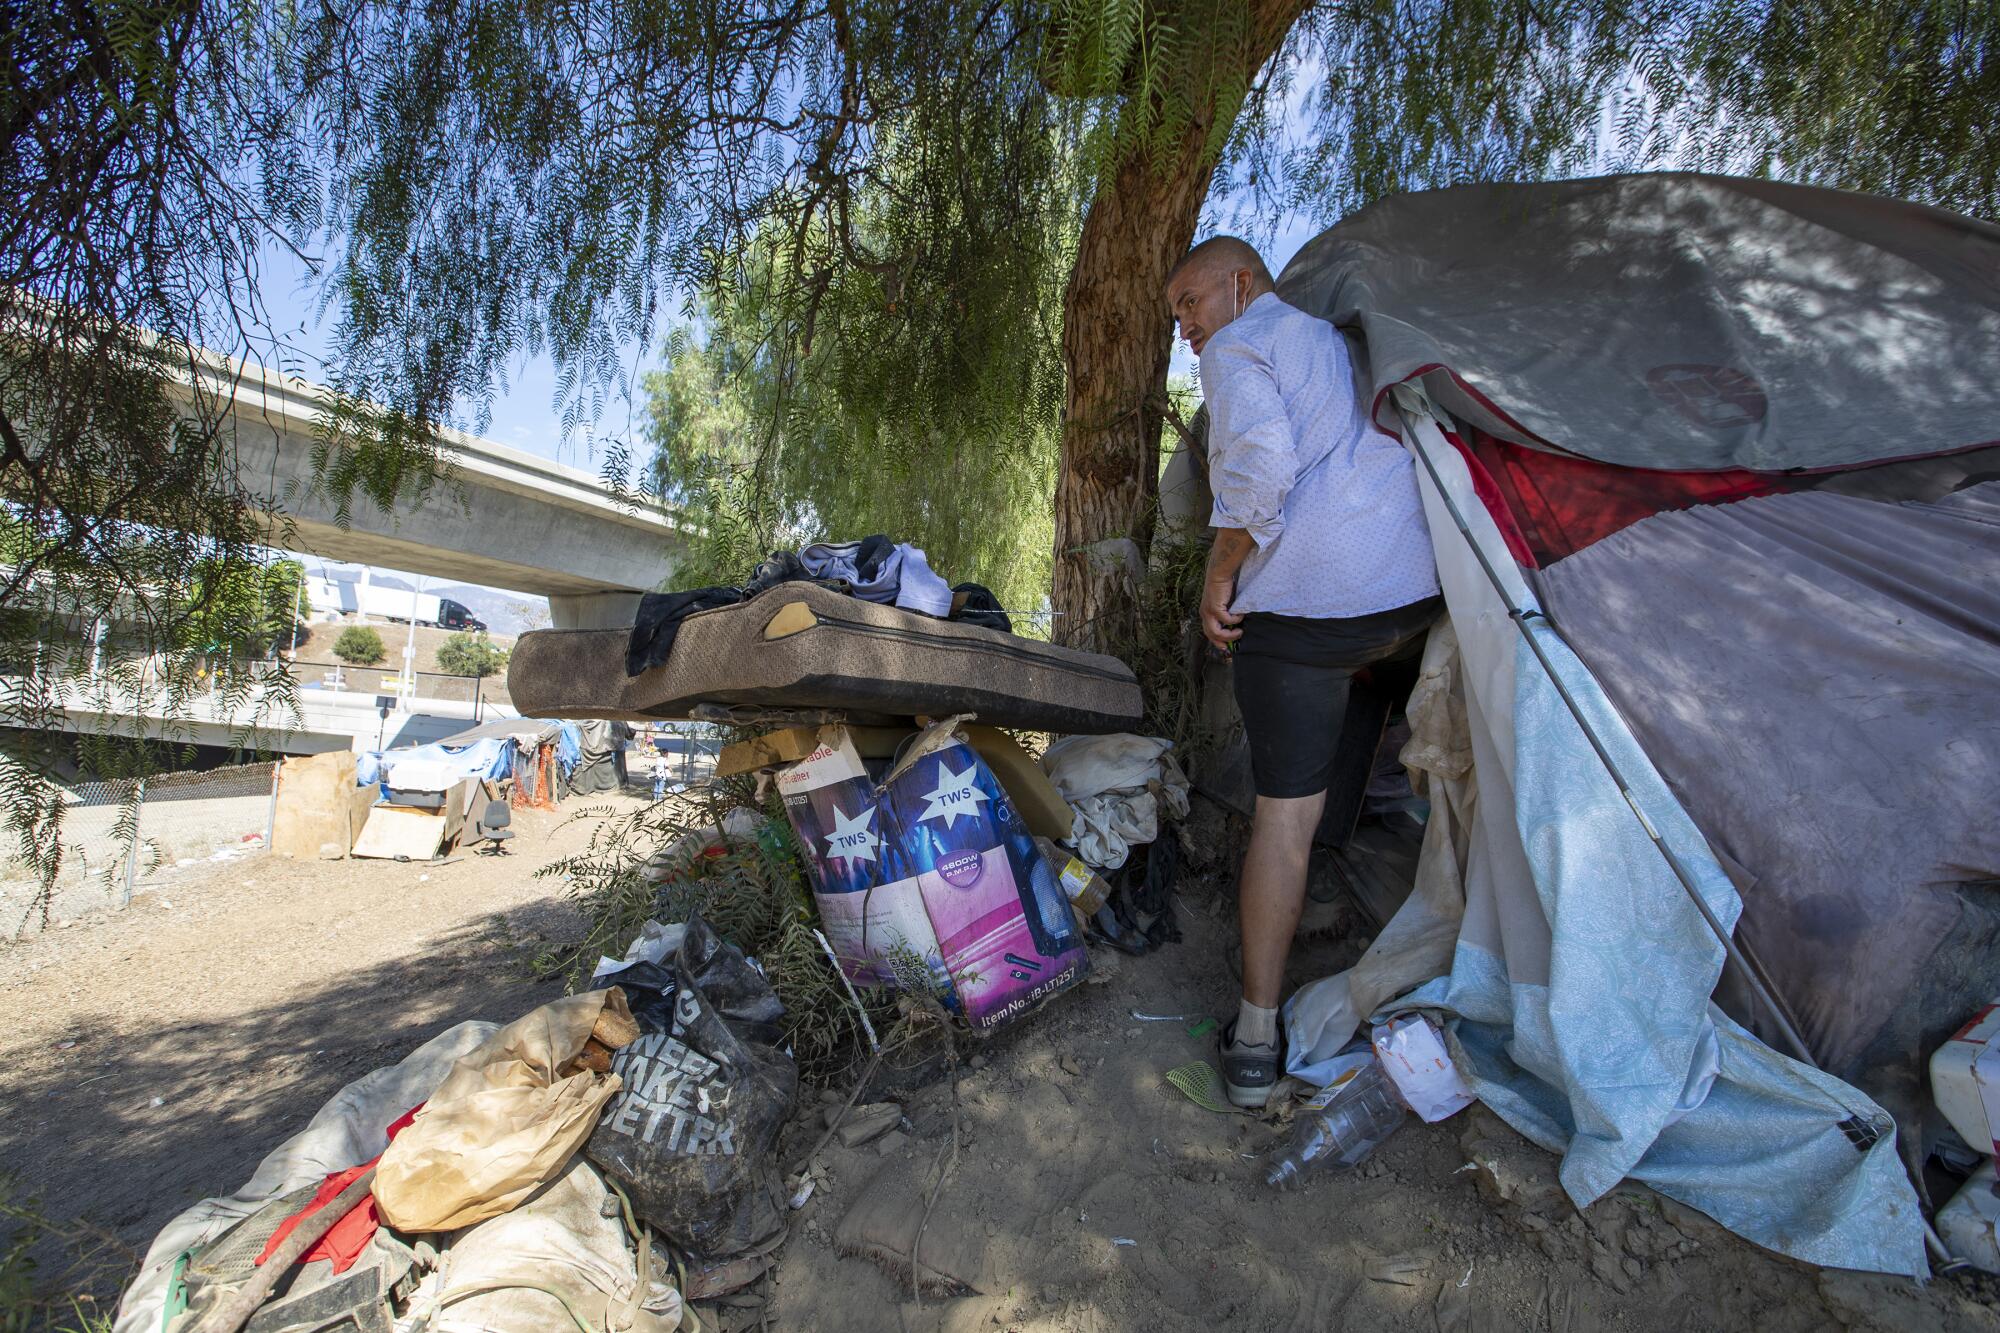 A man stands outside a tent next to belongings 